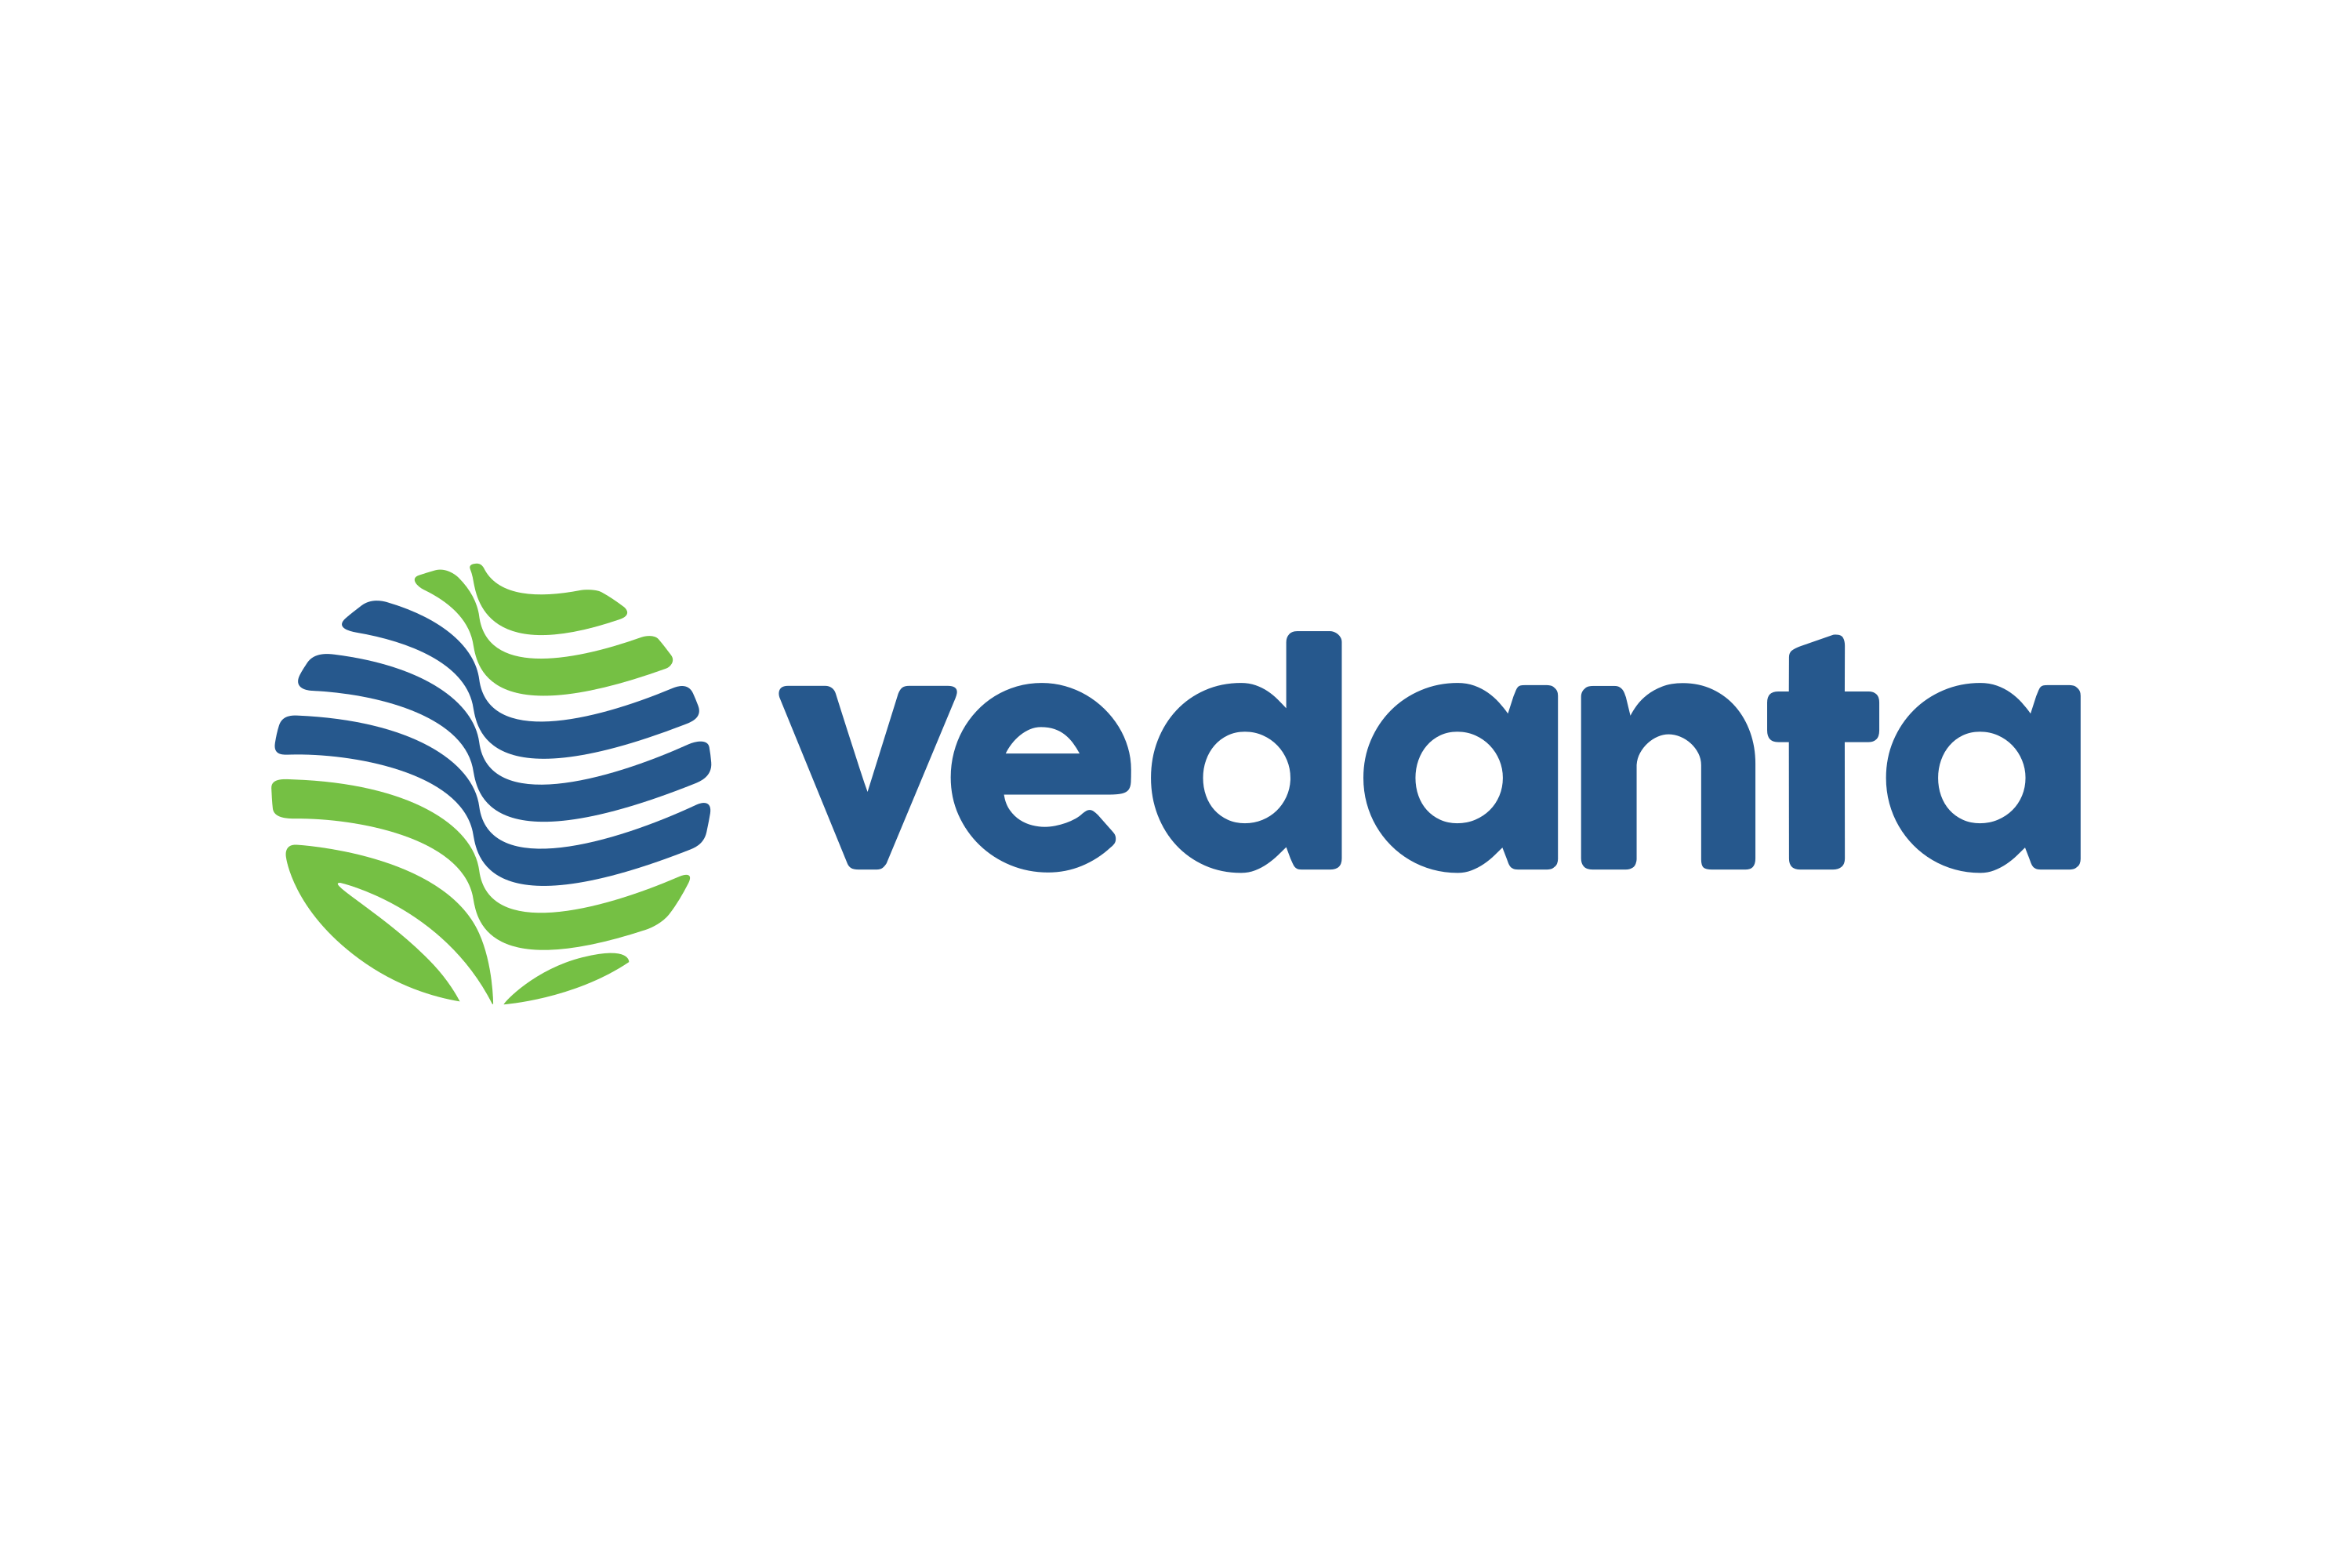 Vedanta’s Sesa Goa Iron Ore Business pledges to become carbon neutral by 2050